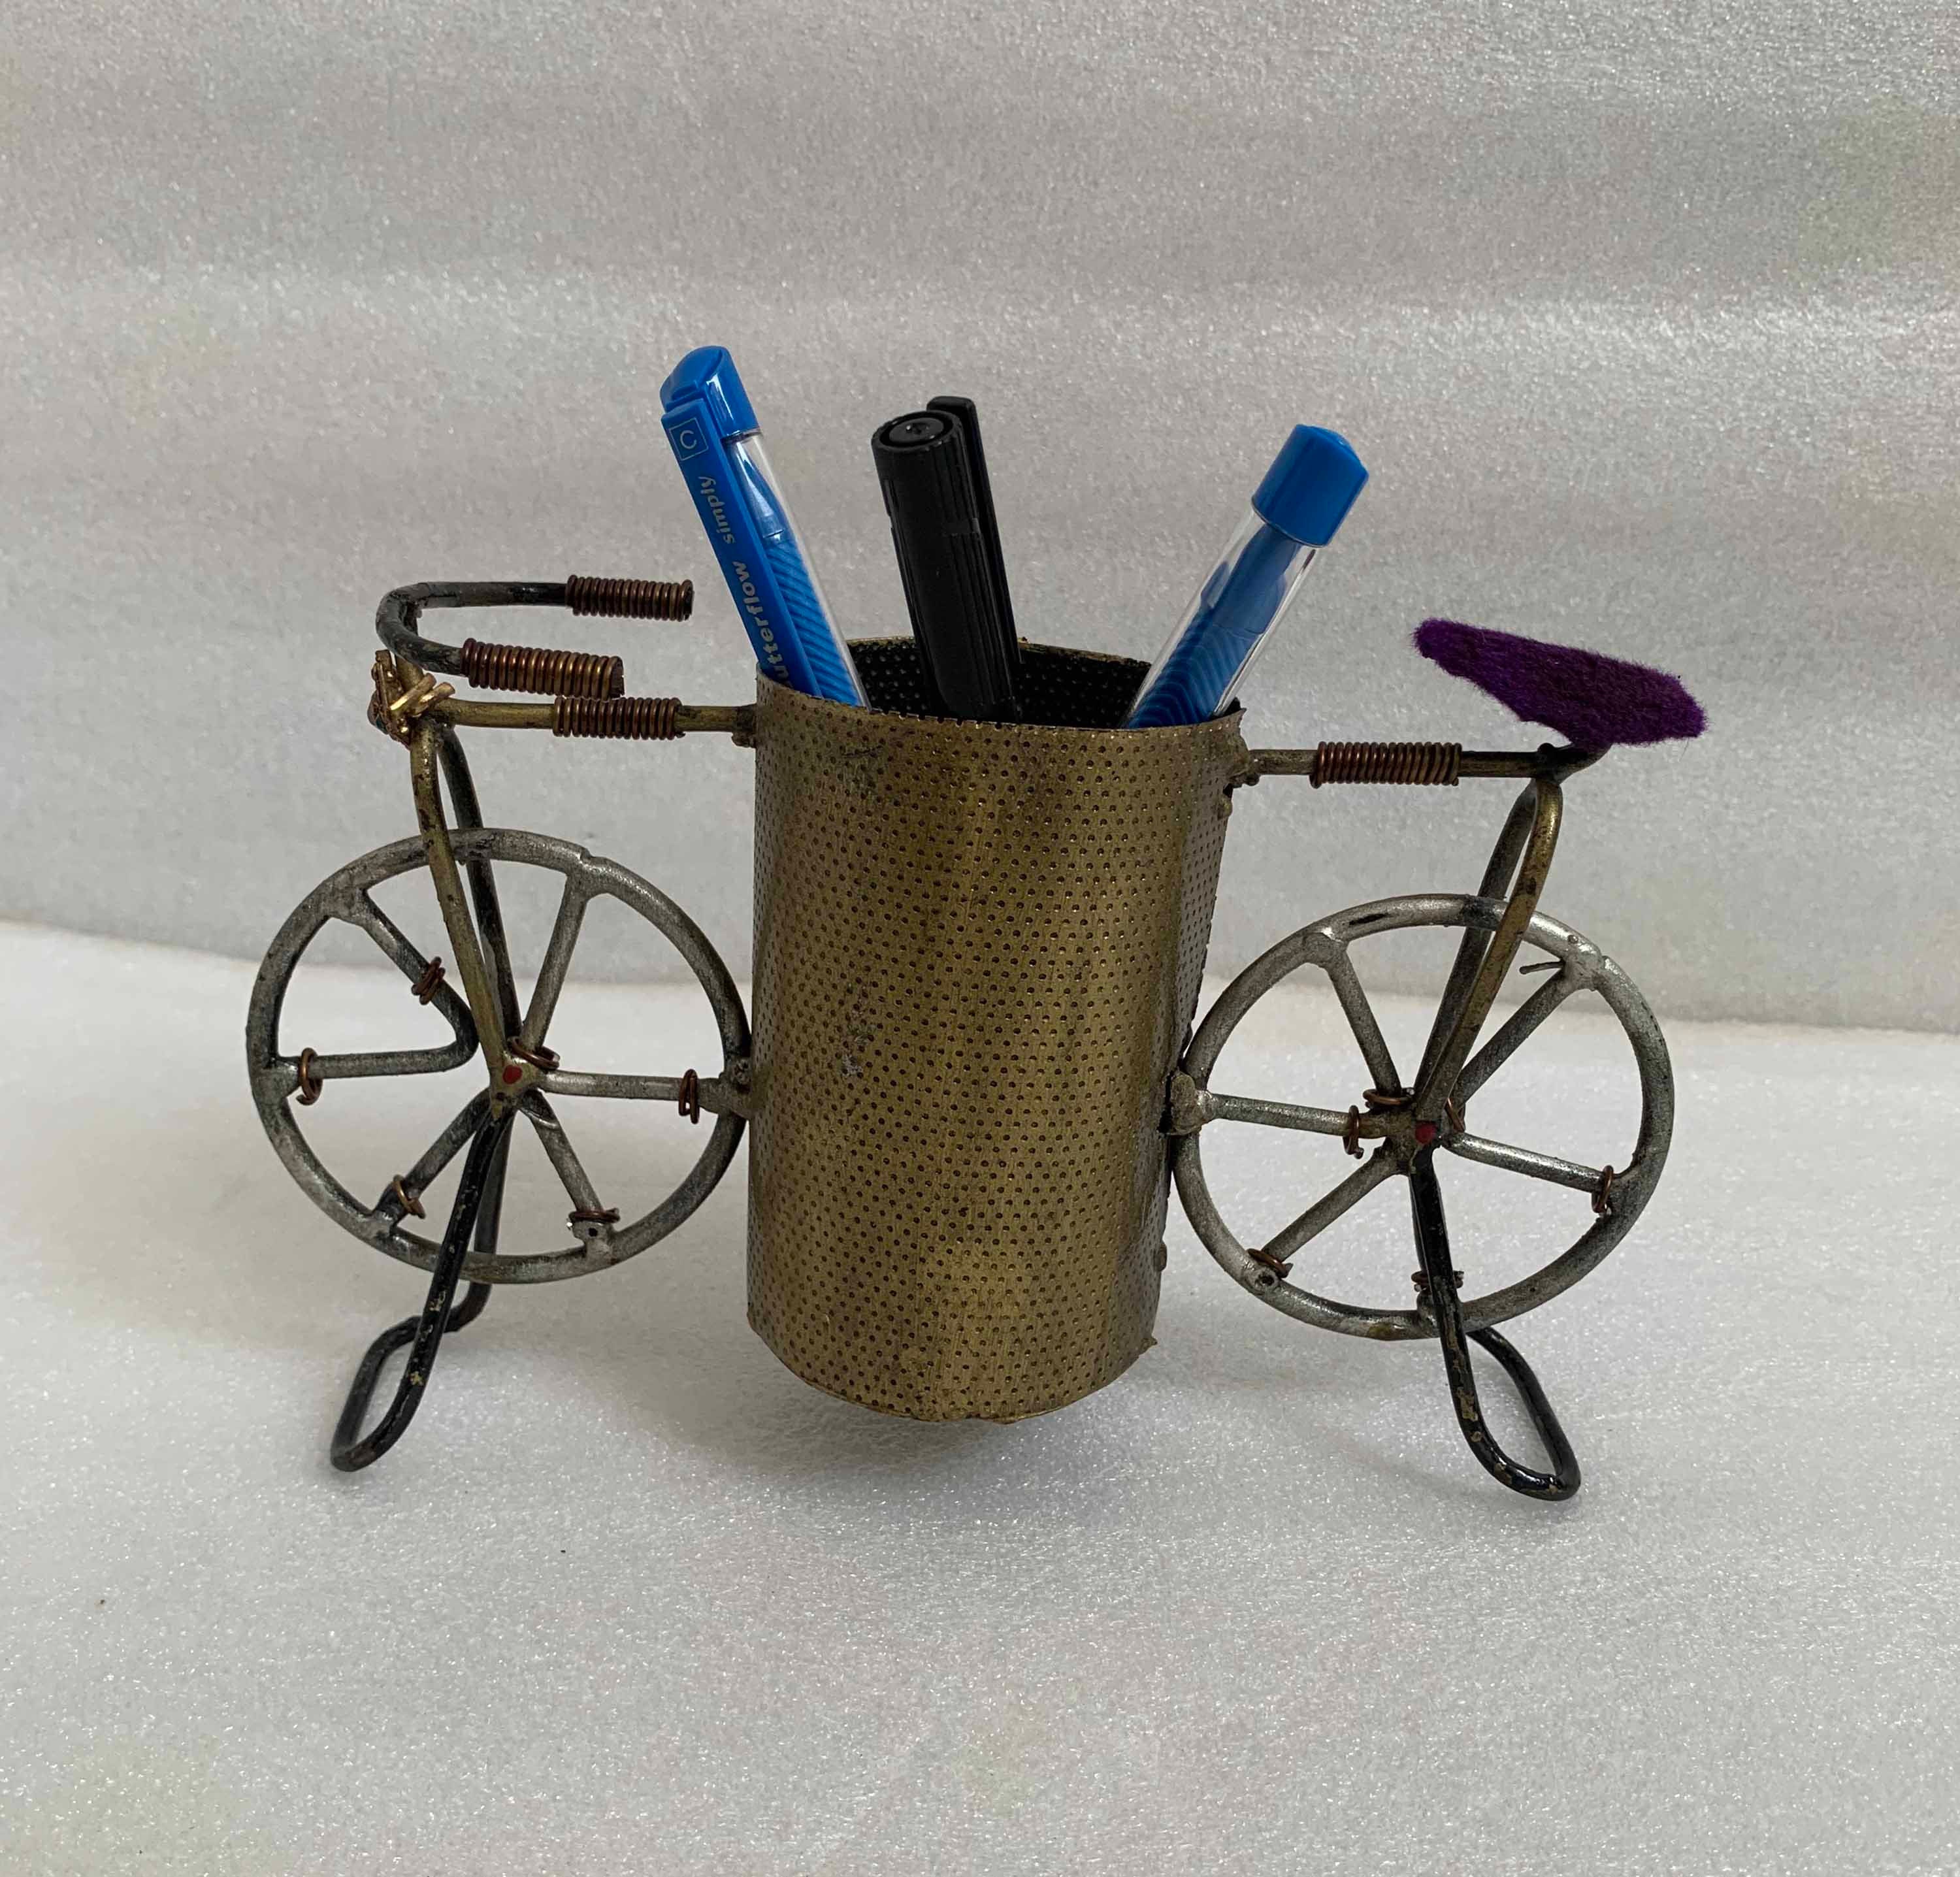 Pen Stand Holder, Vintage Iron Cycle Shape Pen & Pencil Stand Desk